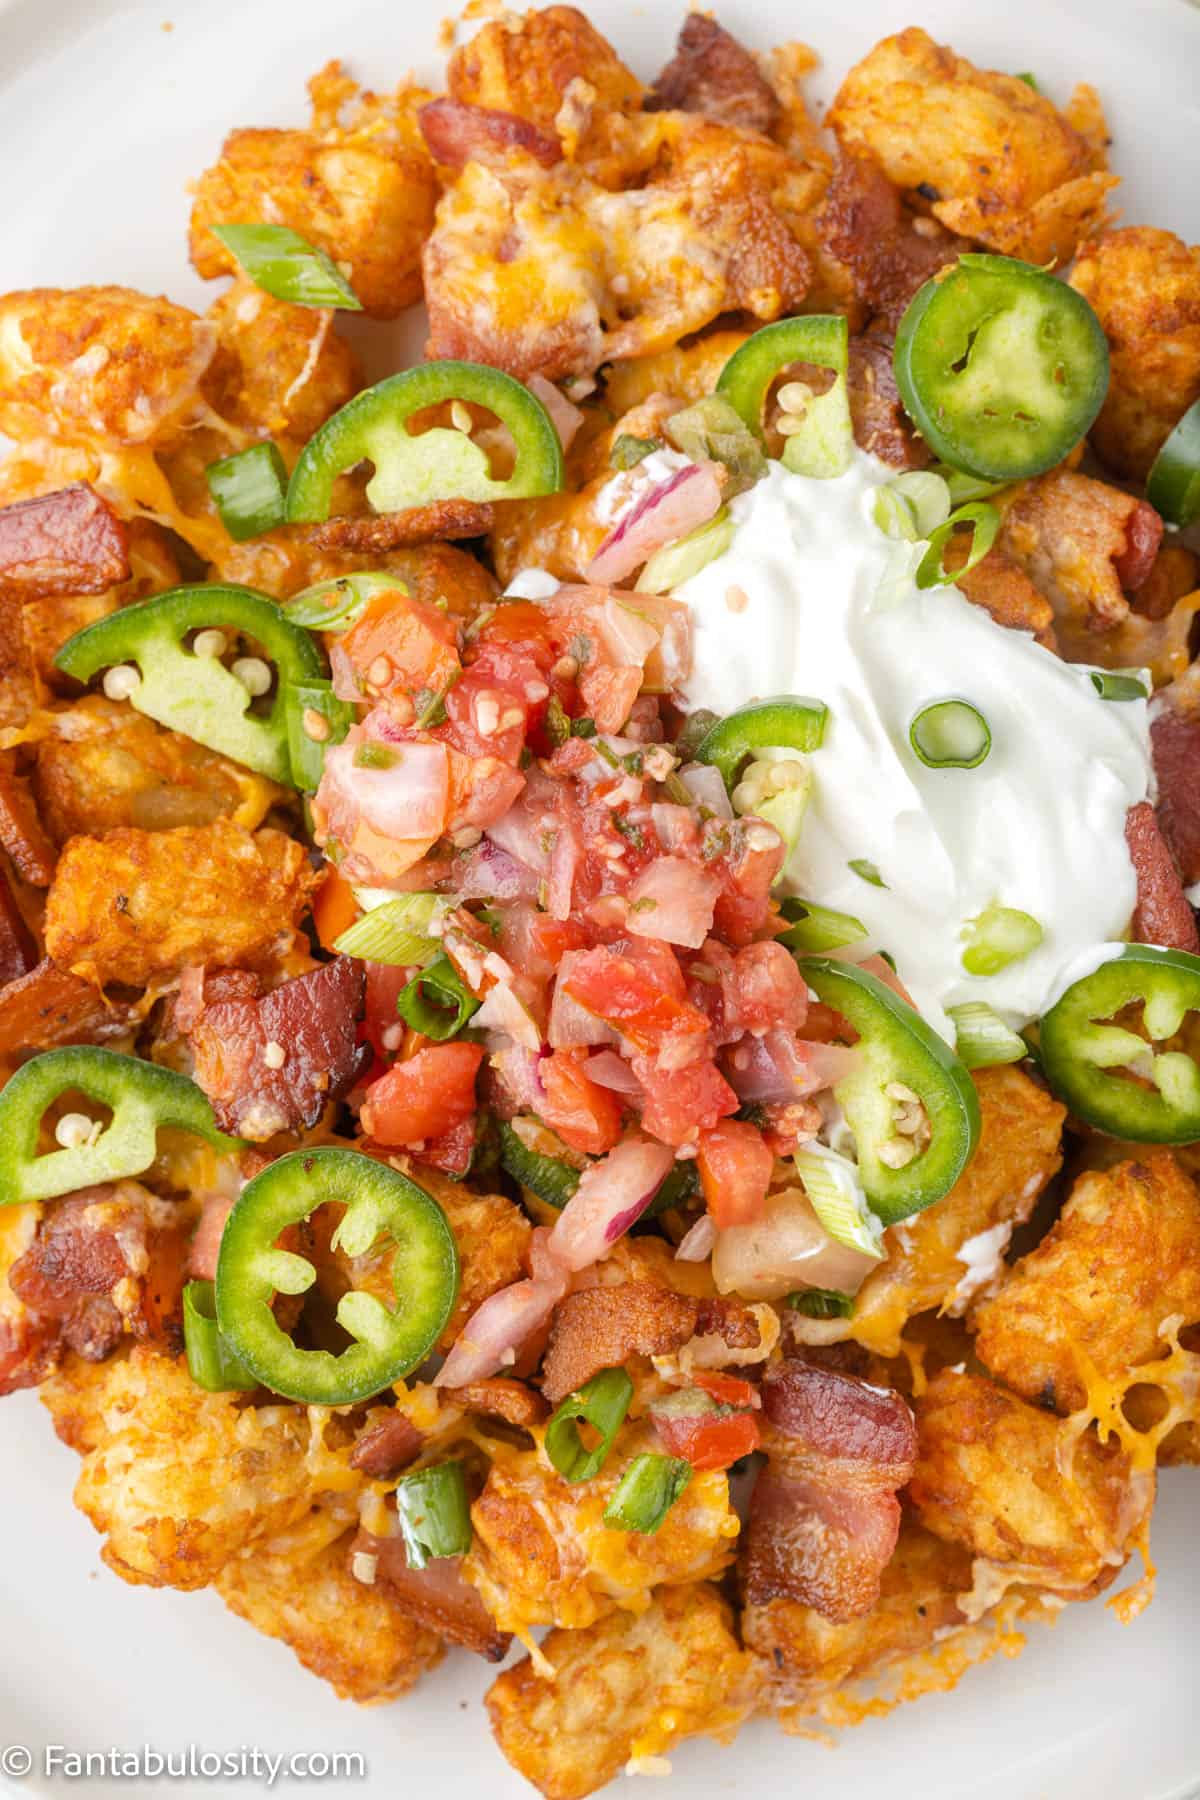 Tater tots with tomatoes, jalapenos and cheese.